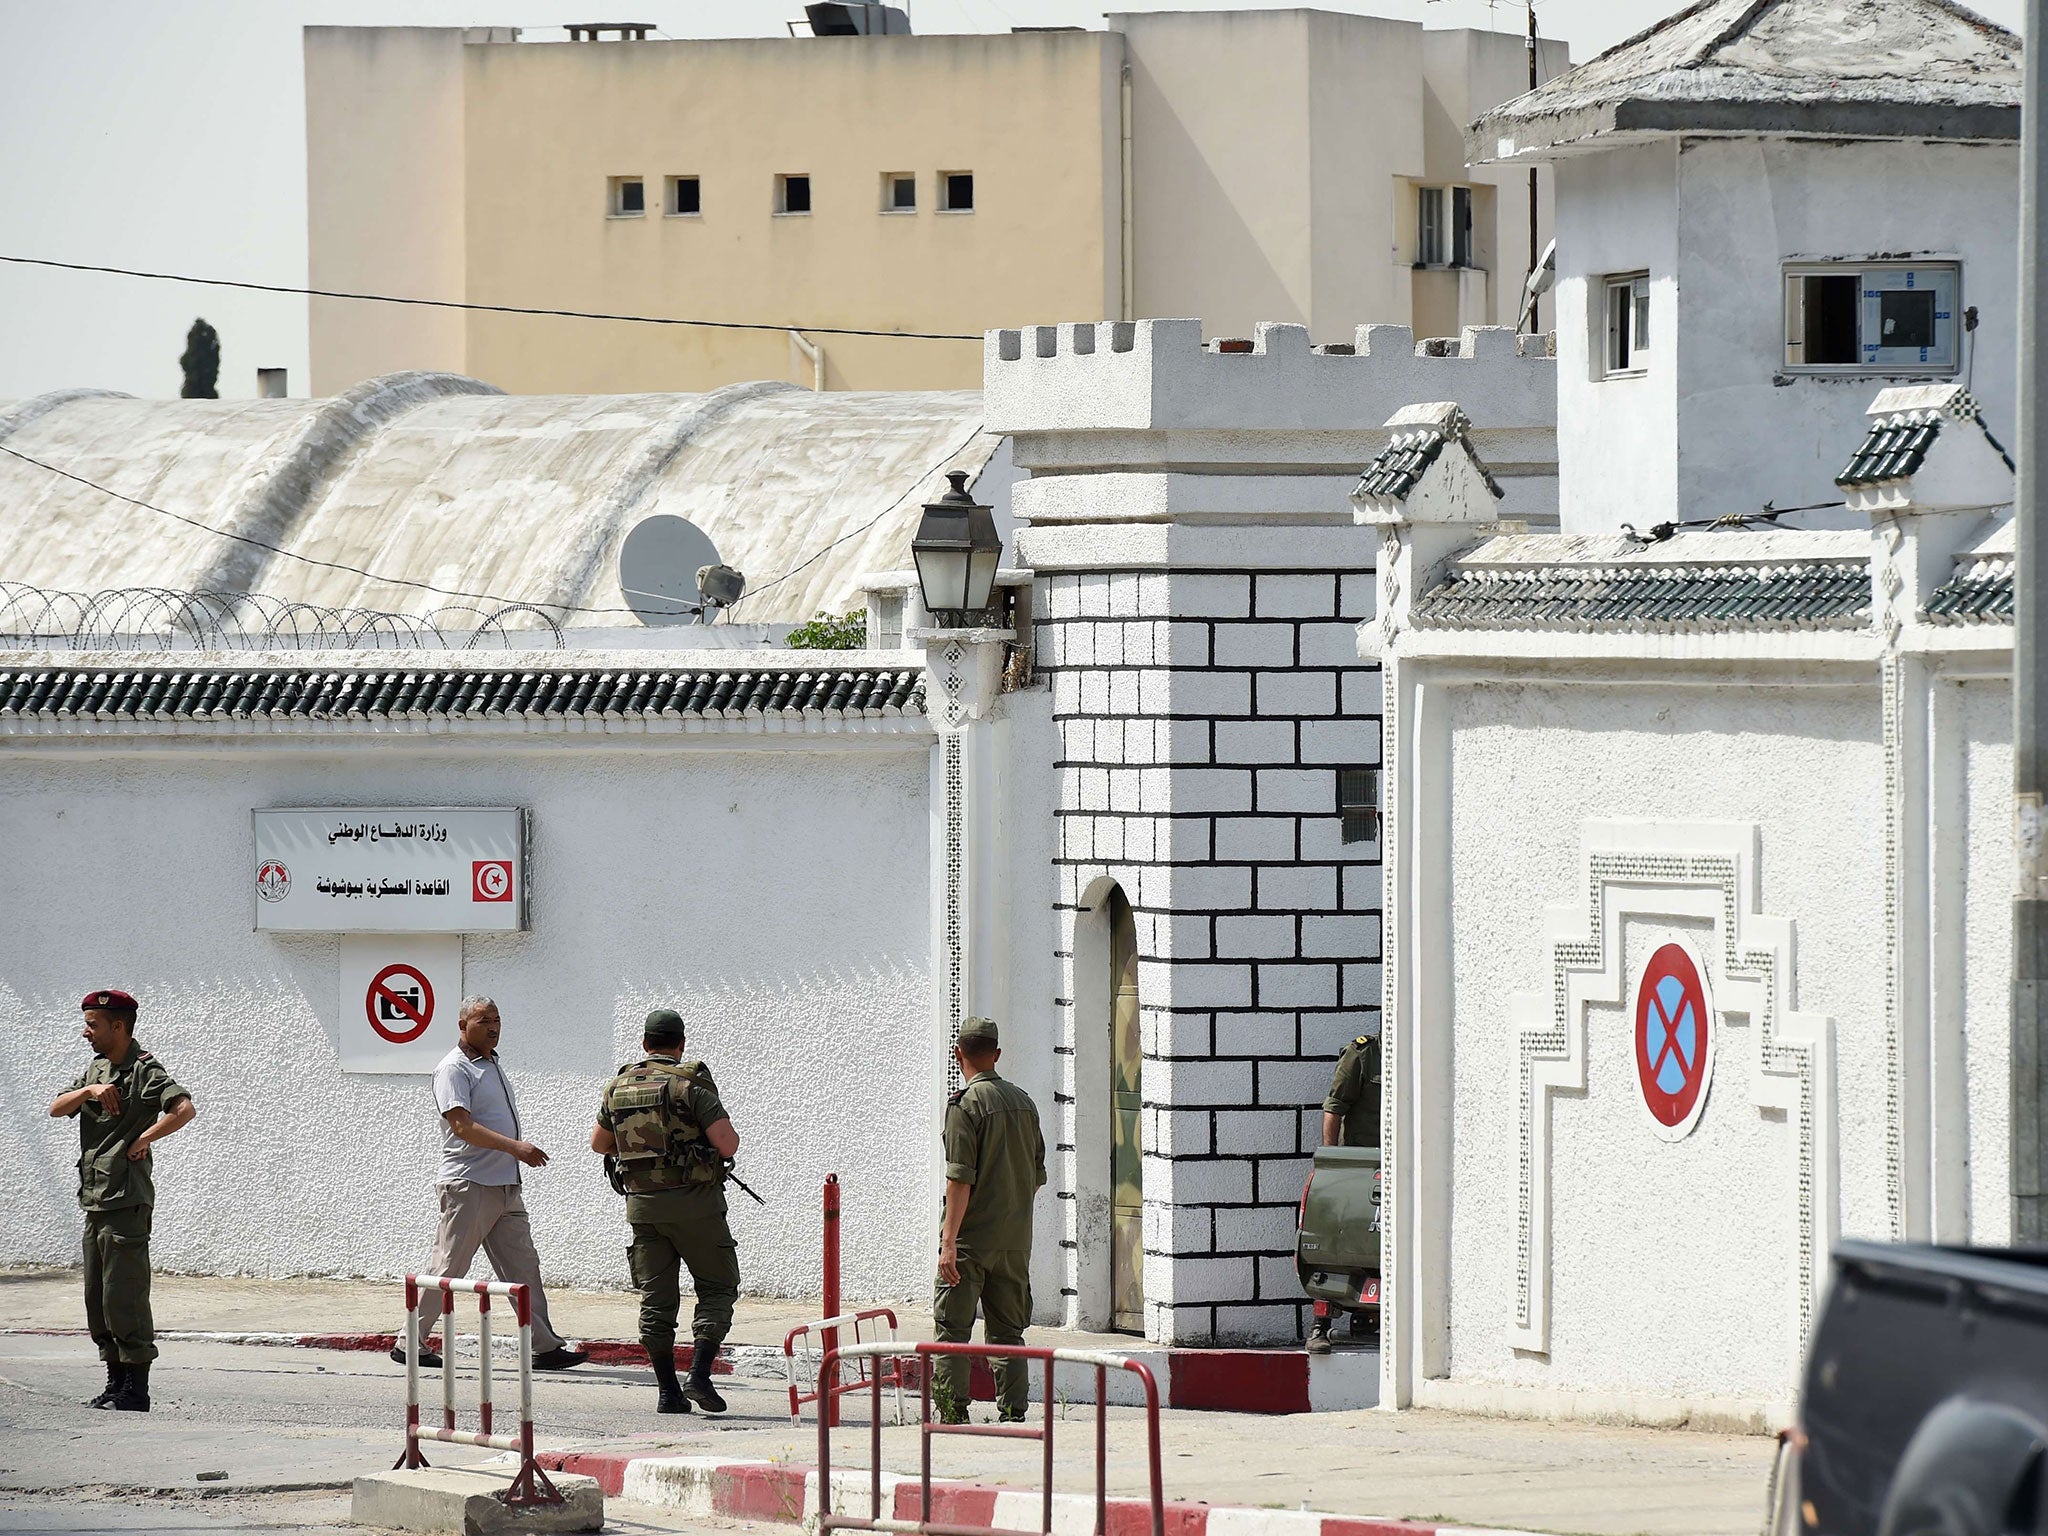 Tunisian soldiers stand guard outside the Bouchoucha army barracks in Tunis on May 25, 2015 after a soldier opened fire at his colleagues